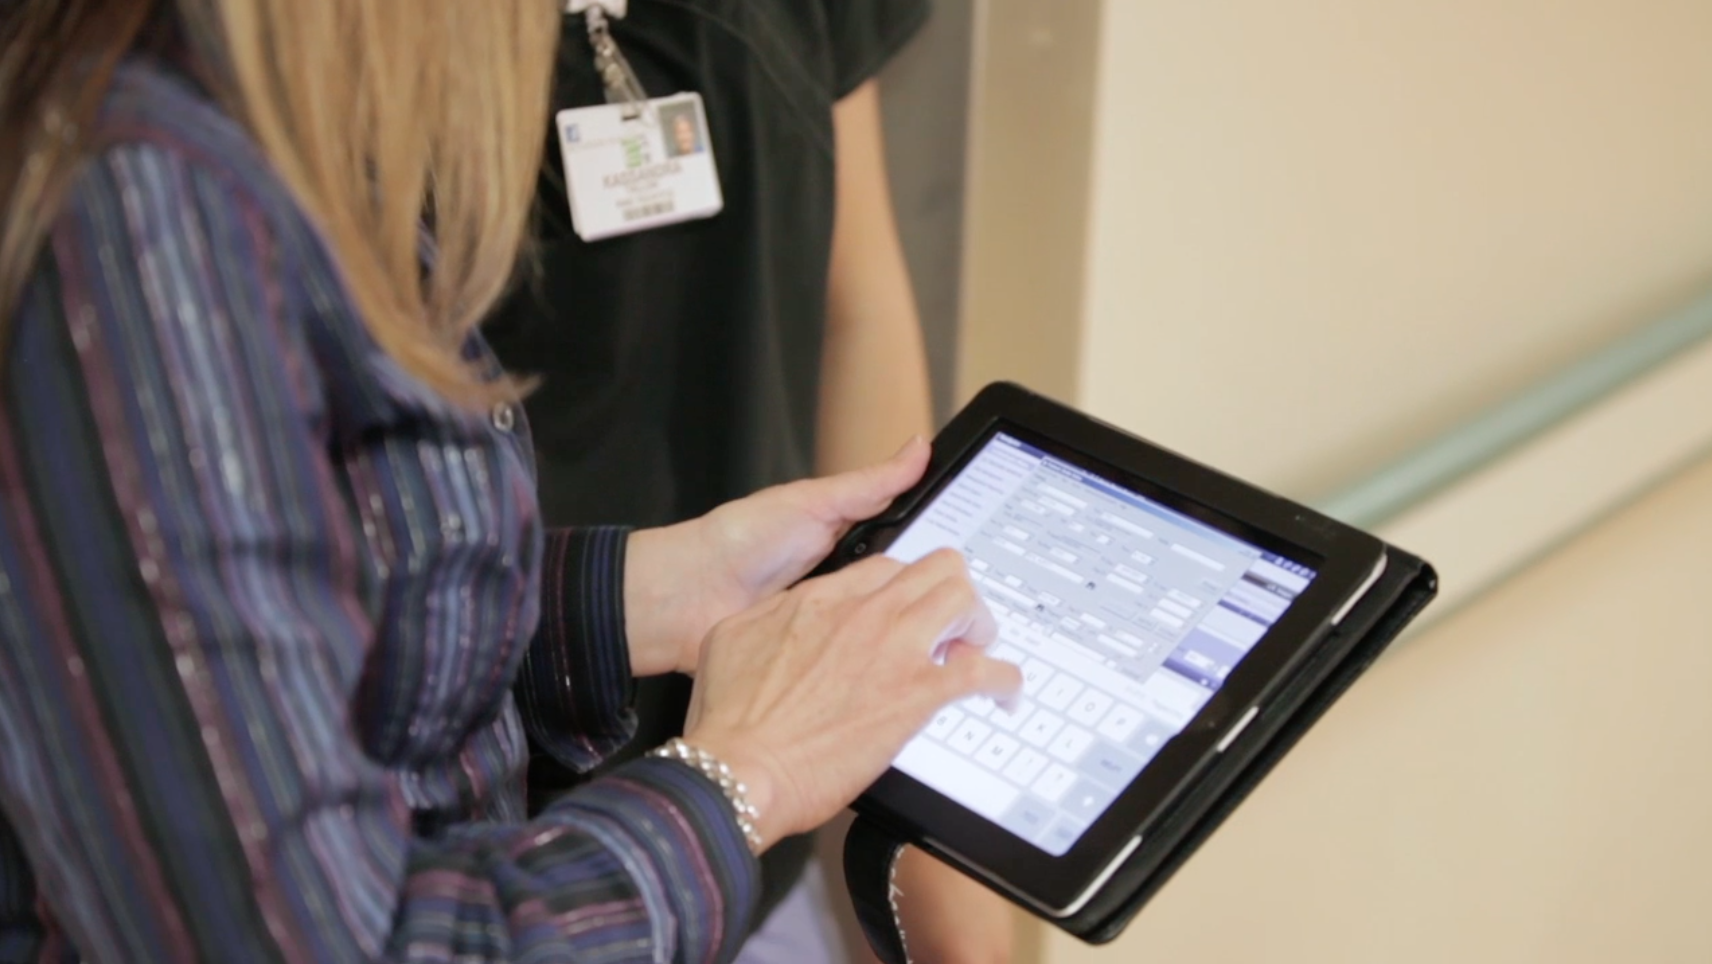 Bethesda RIS/PACS Admisitrator Anne Osowski accessing the system on an iPad